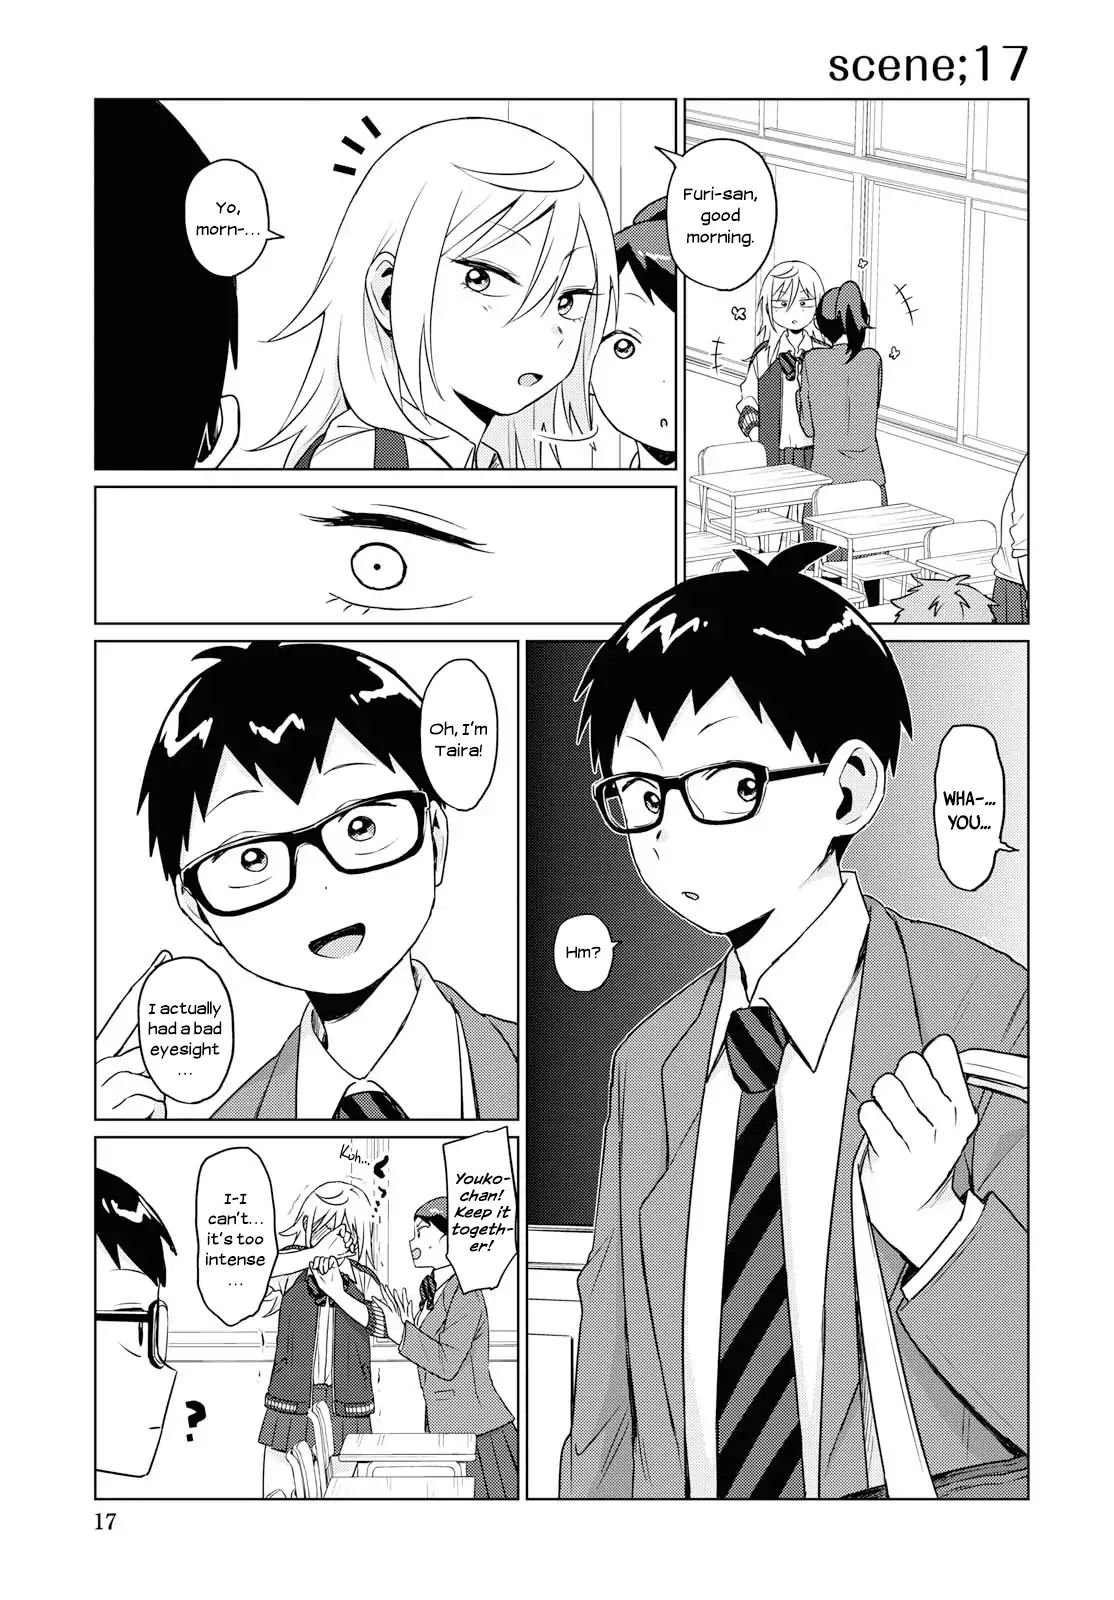 No Matter What You Say, Furi-san is Scary. - chapter 6 - #3